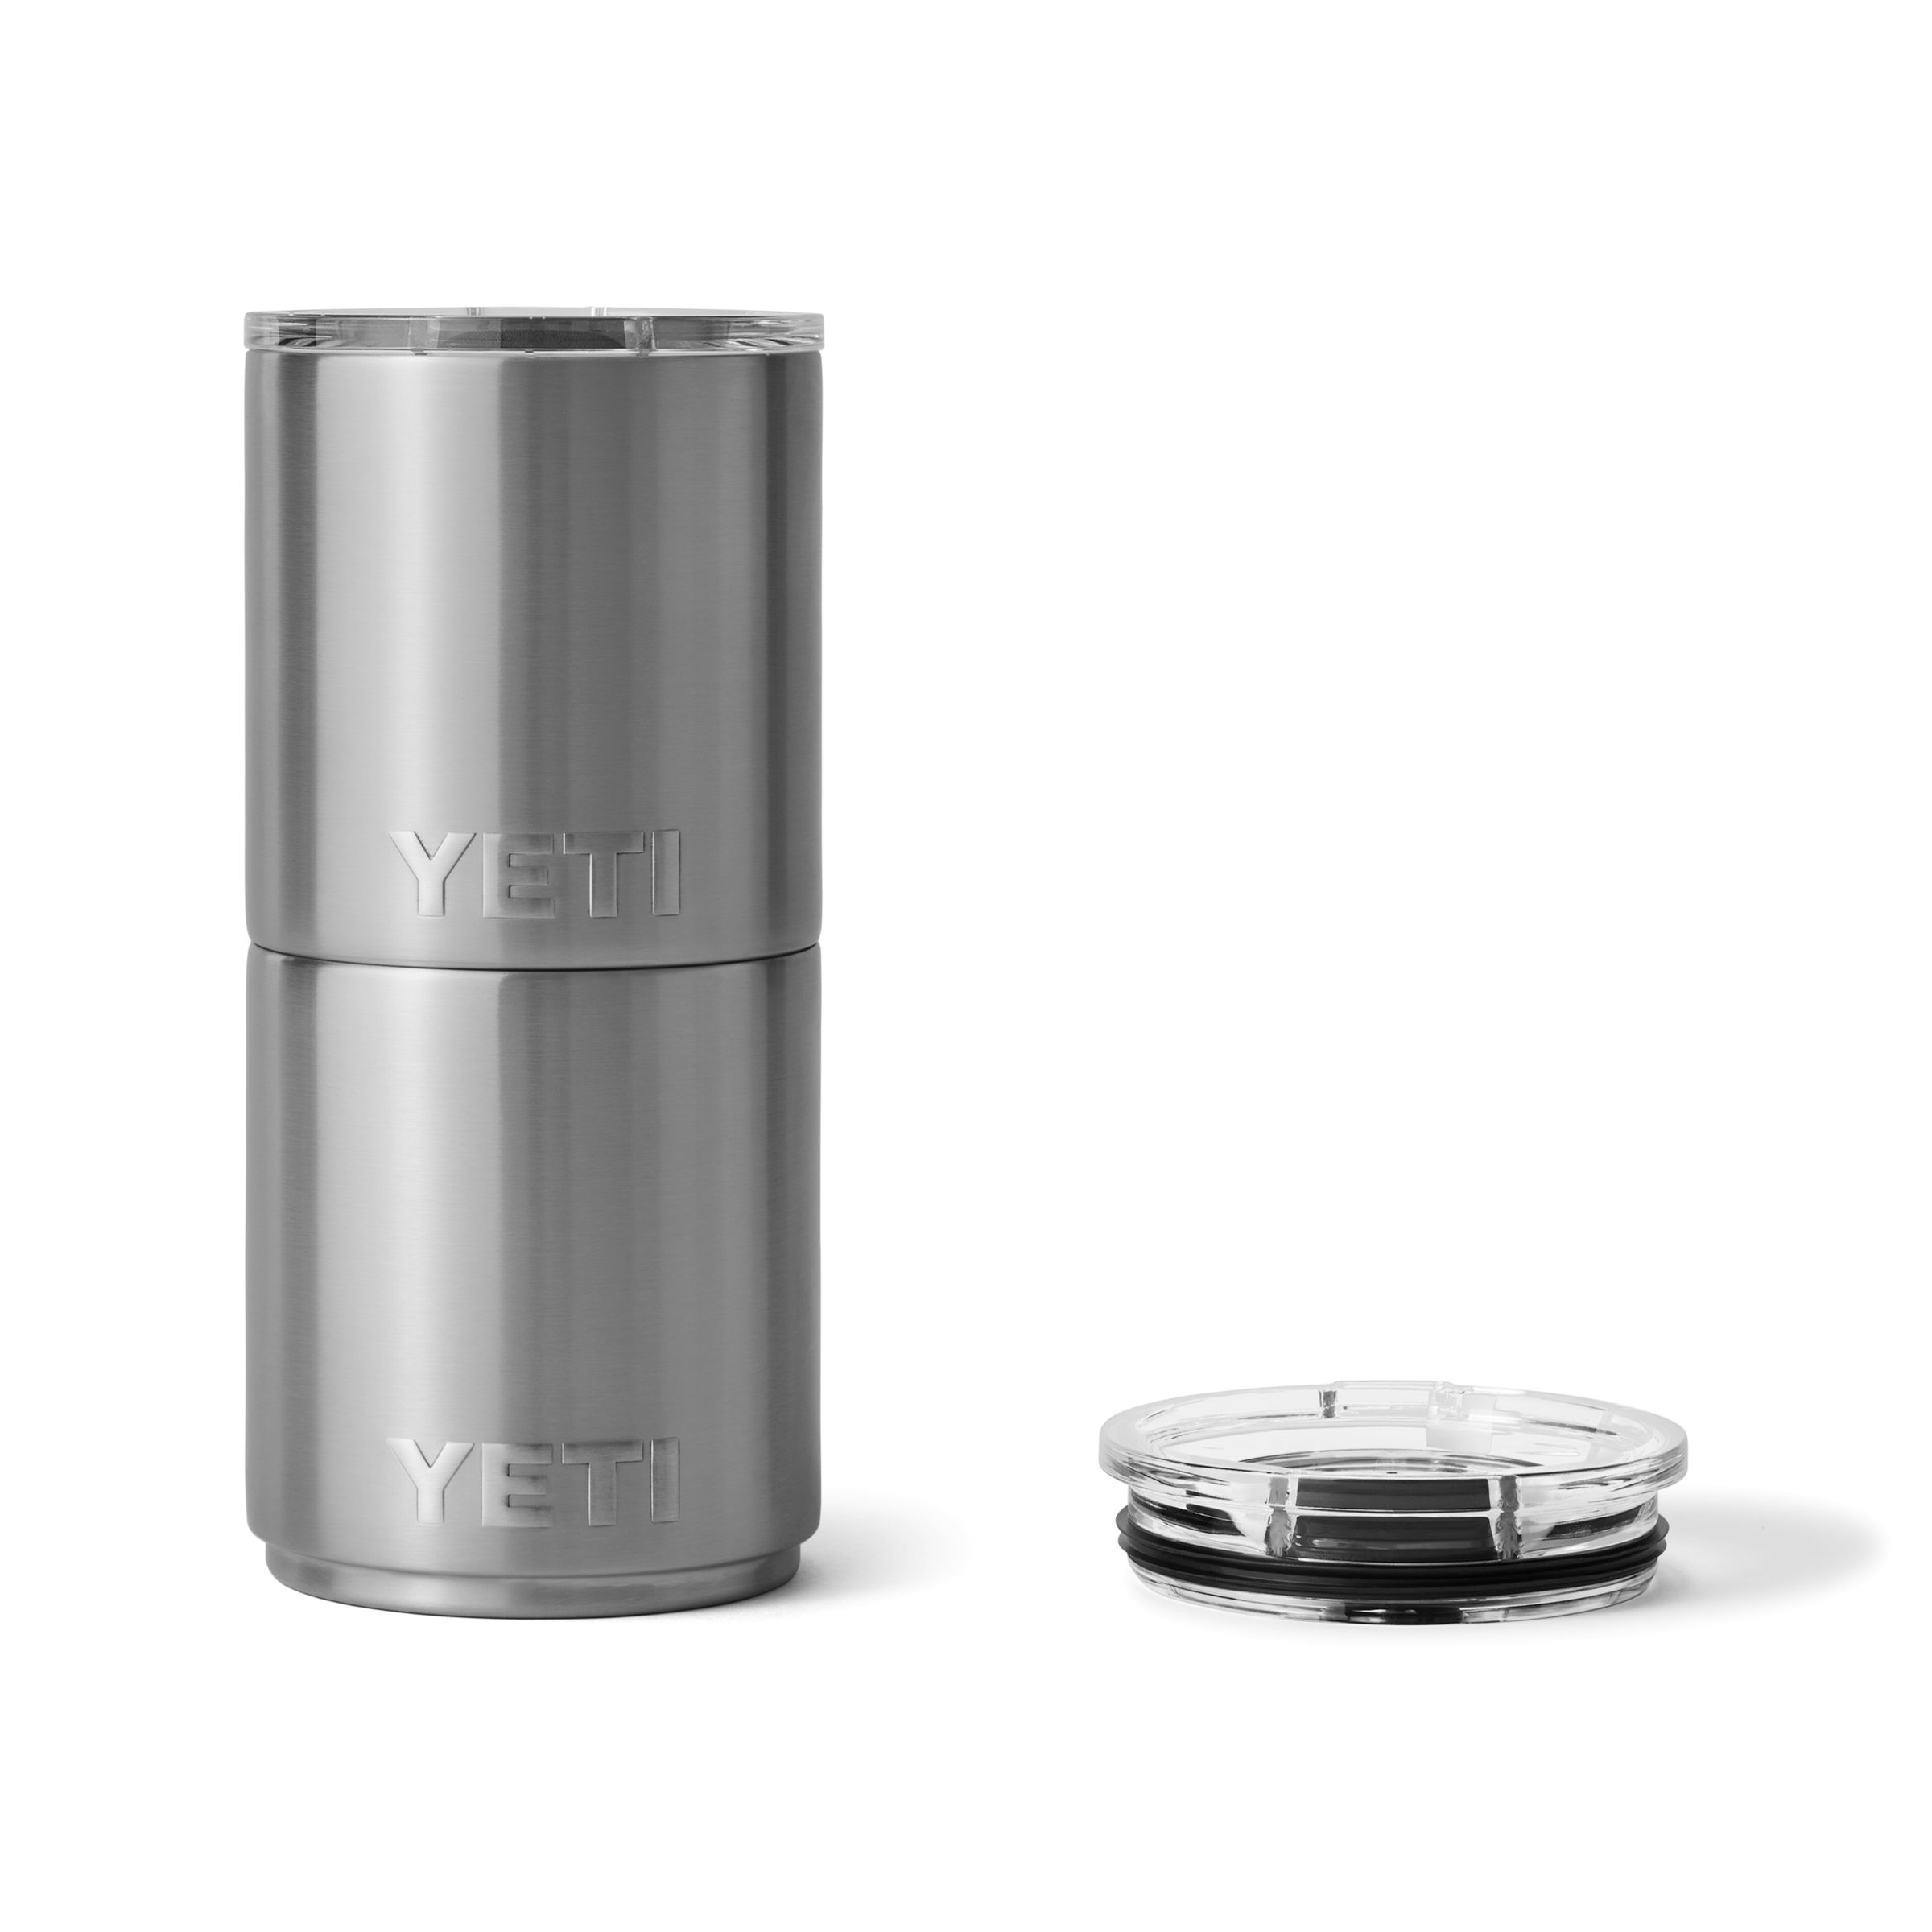 https://media-www.sportchek.ca/product/div-01-hardgoods/dpt-38-hydration/sdpt-14-stainless-steel/333469381/yeti-rambler-10-oz-lowball-with-magslider-lid-19d2a902-a71f-49f1-b963-b4492846dc3c-jpgrendition.jpg?imdensity=1&imwidth=640&impolicy=mZoom